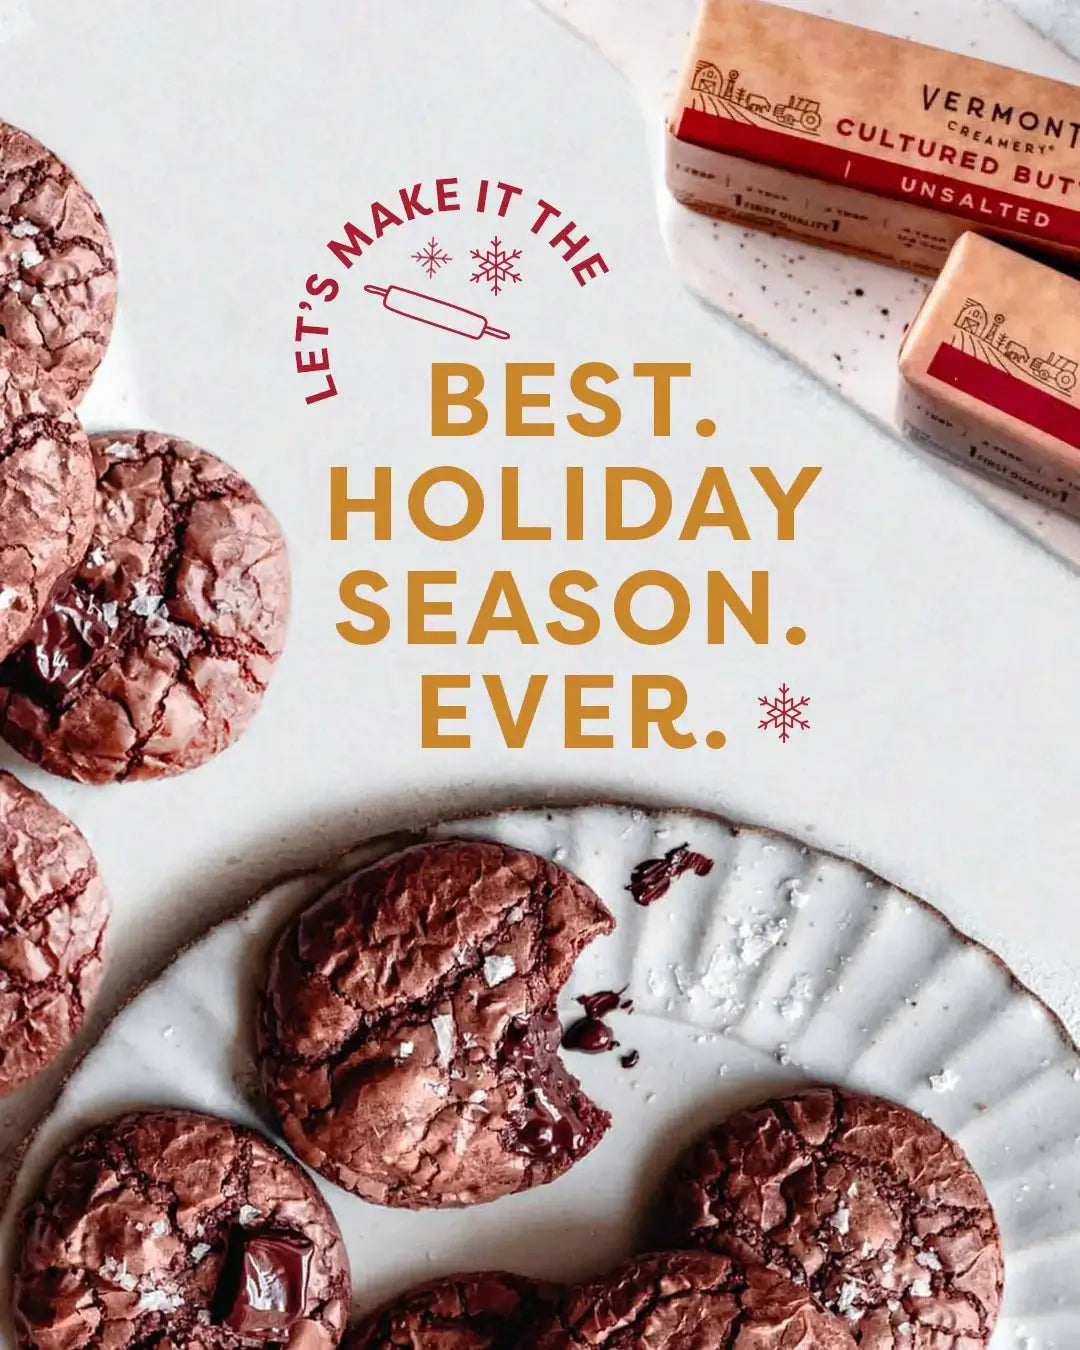 Vermont Creamery | Let's Make the Best Holiday Season Ever